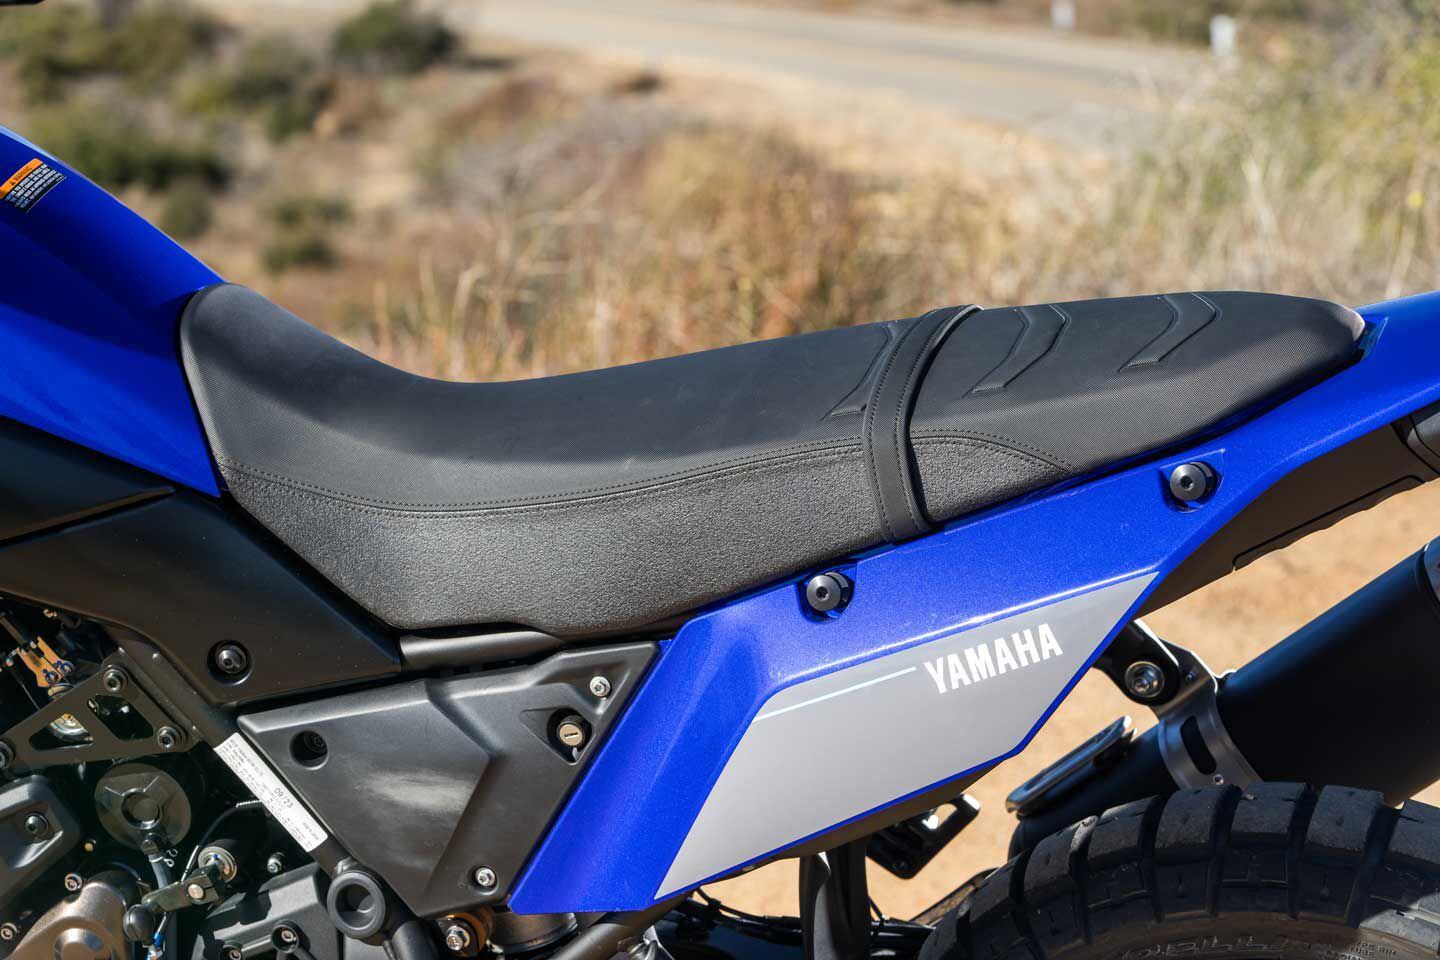 Taller riders and those who cover more off-road than on, will value the taller one-piece rally seat available as an OE accessory ($219.99).